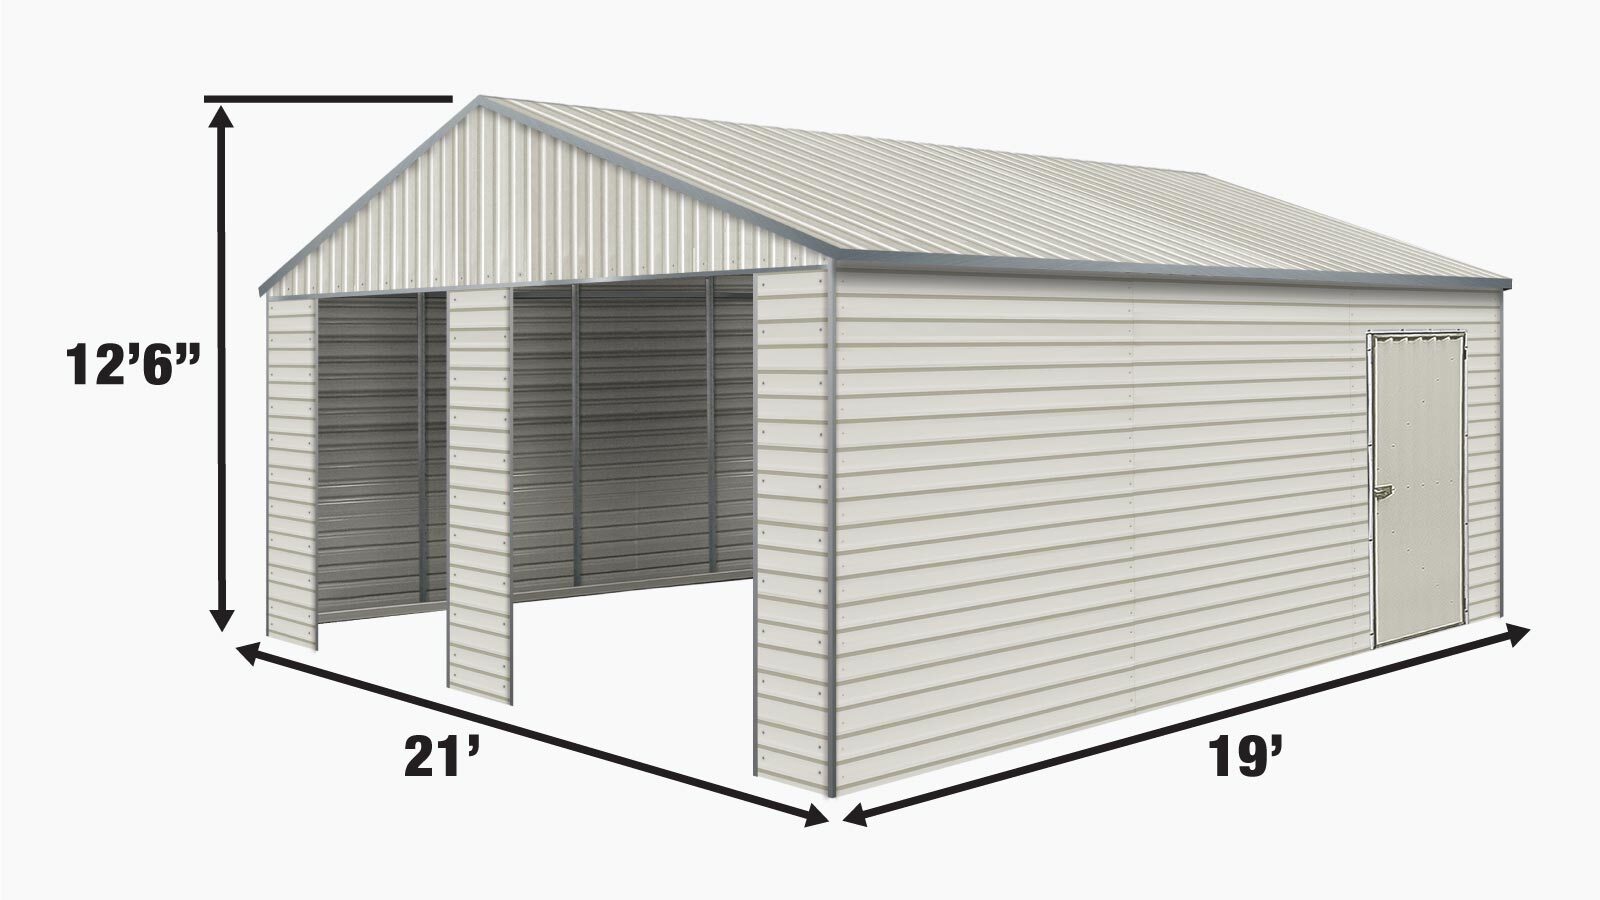 TMG Industrial 21’ x 19’ Double Garage Metal Shed with Side Entry Door, 400 Sq-Ft, 8' Eave Height, 27 GA Corrugated Panels, TMG-MS2119-specifications-image